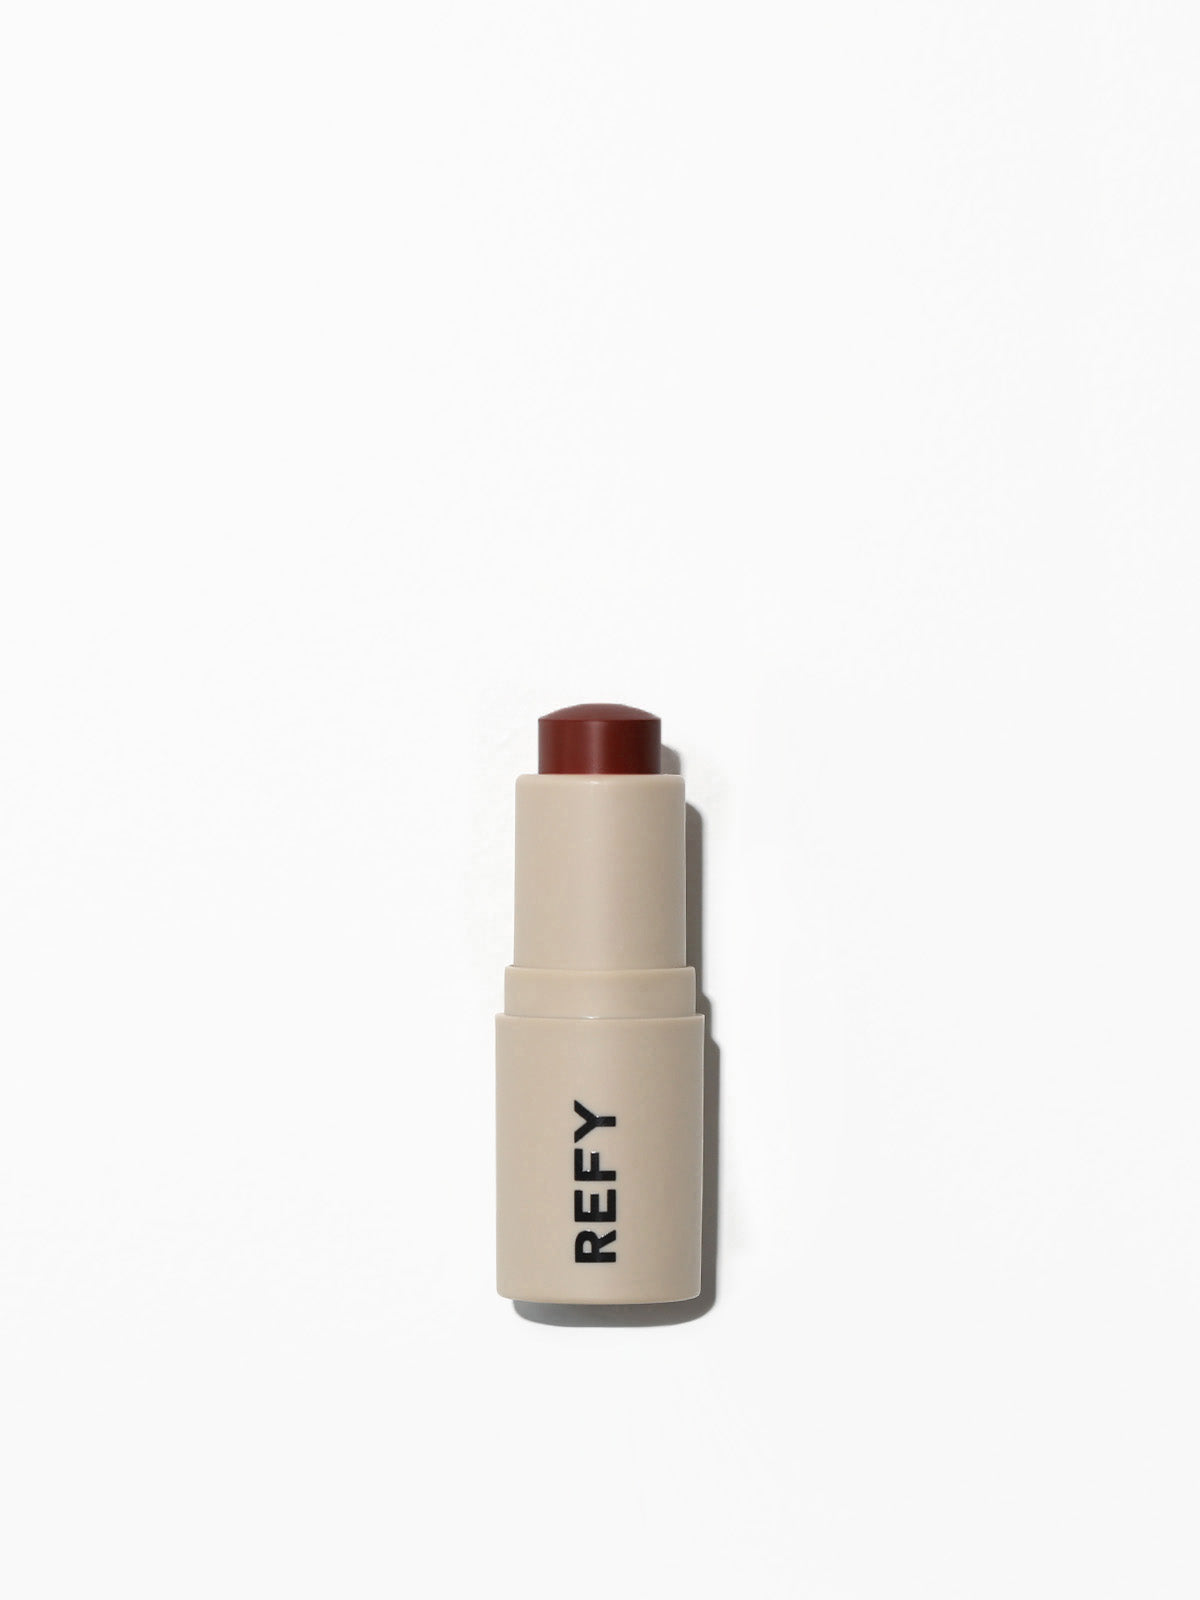 FRONT IMAGE OF REFY LIP BLUSH IN CNAYON. A DEEP, REDDY BROWN.